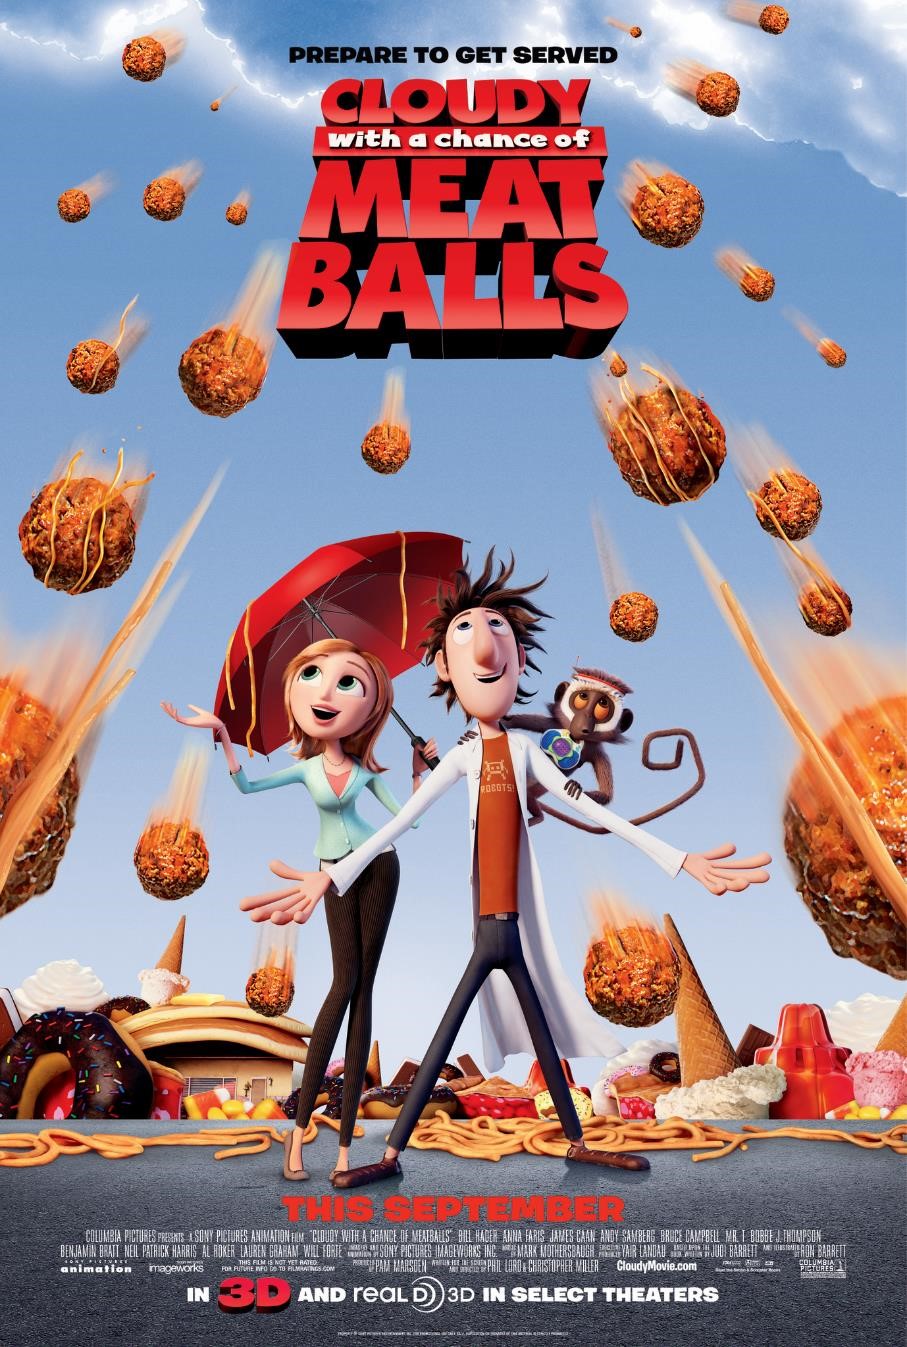 Film poster for CLOUDY WITH A CHANCE OF MEATBALLS (2009)